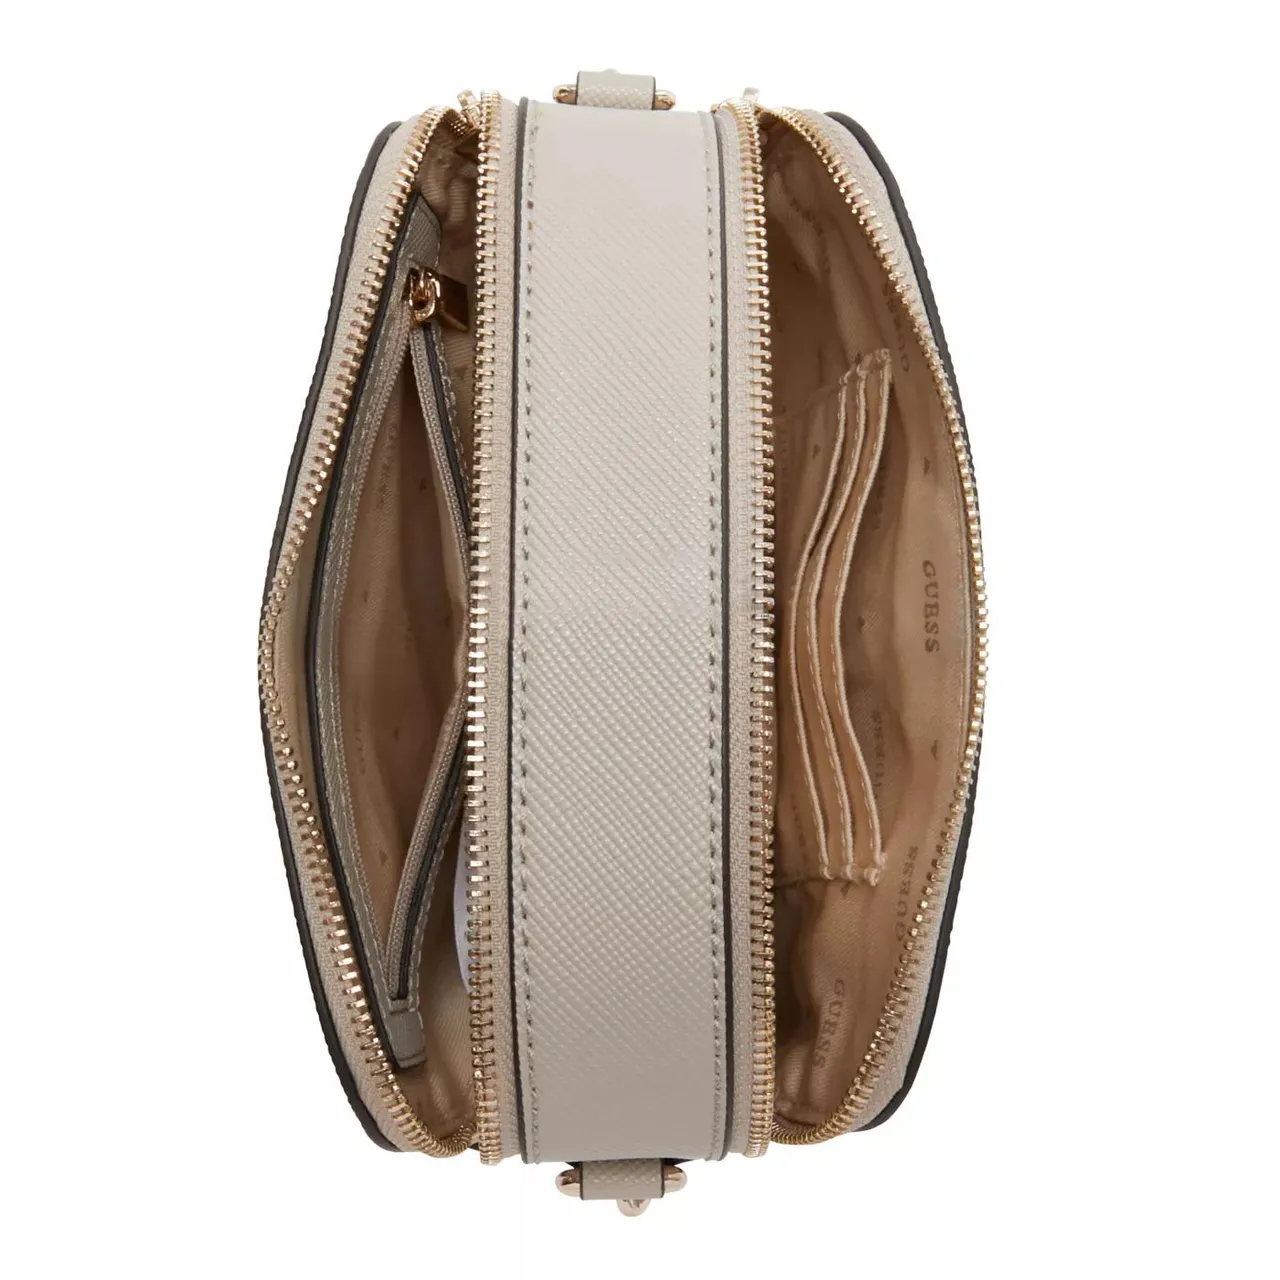 Guess Crossbody Bags - Guess Noelle Taupe Umhängetasche HWZG78-79140-TAU - Gr. unisize - in Taupe - für Damen